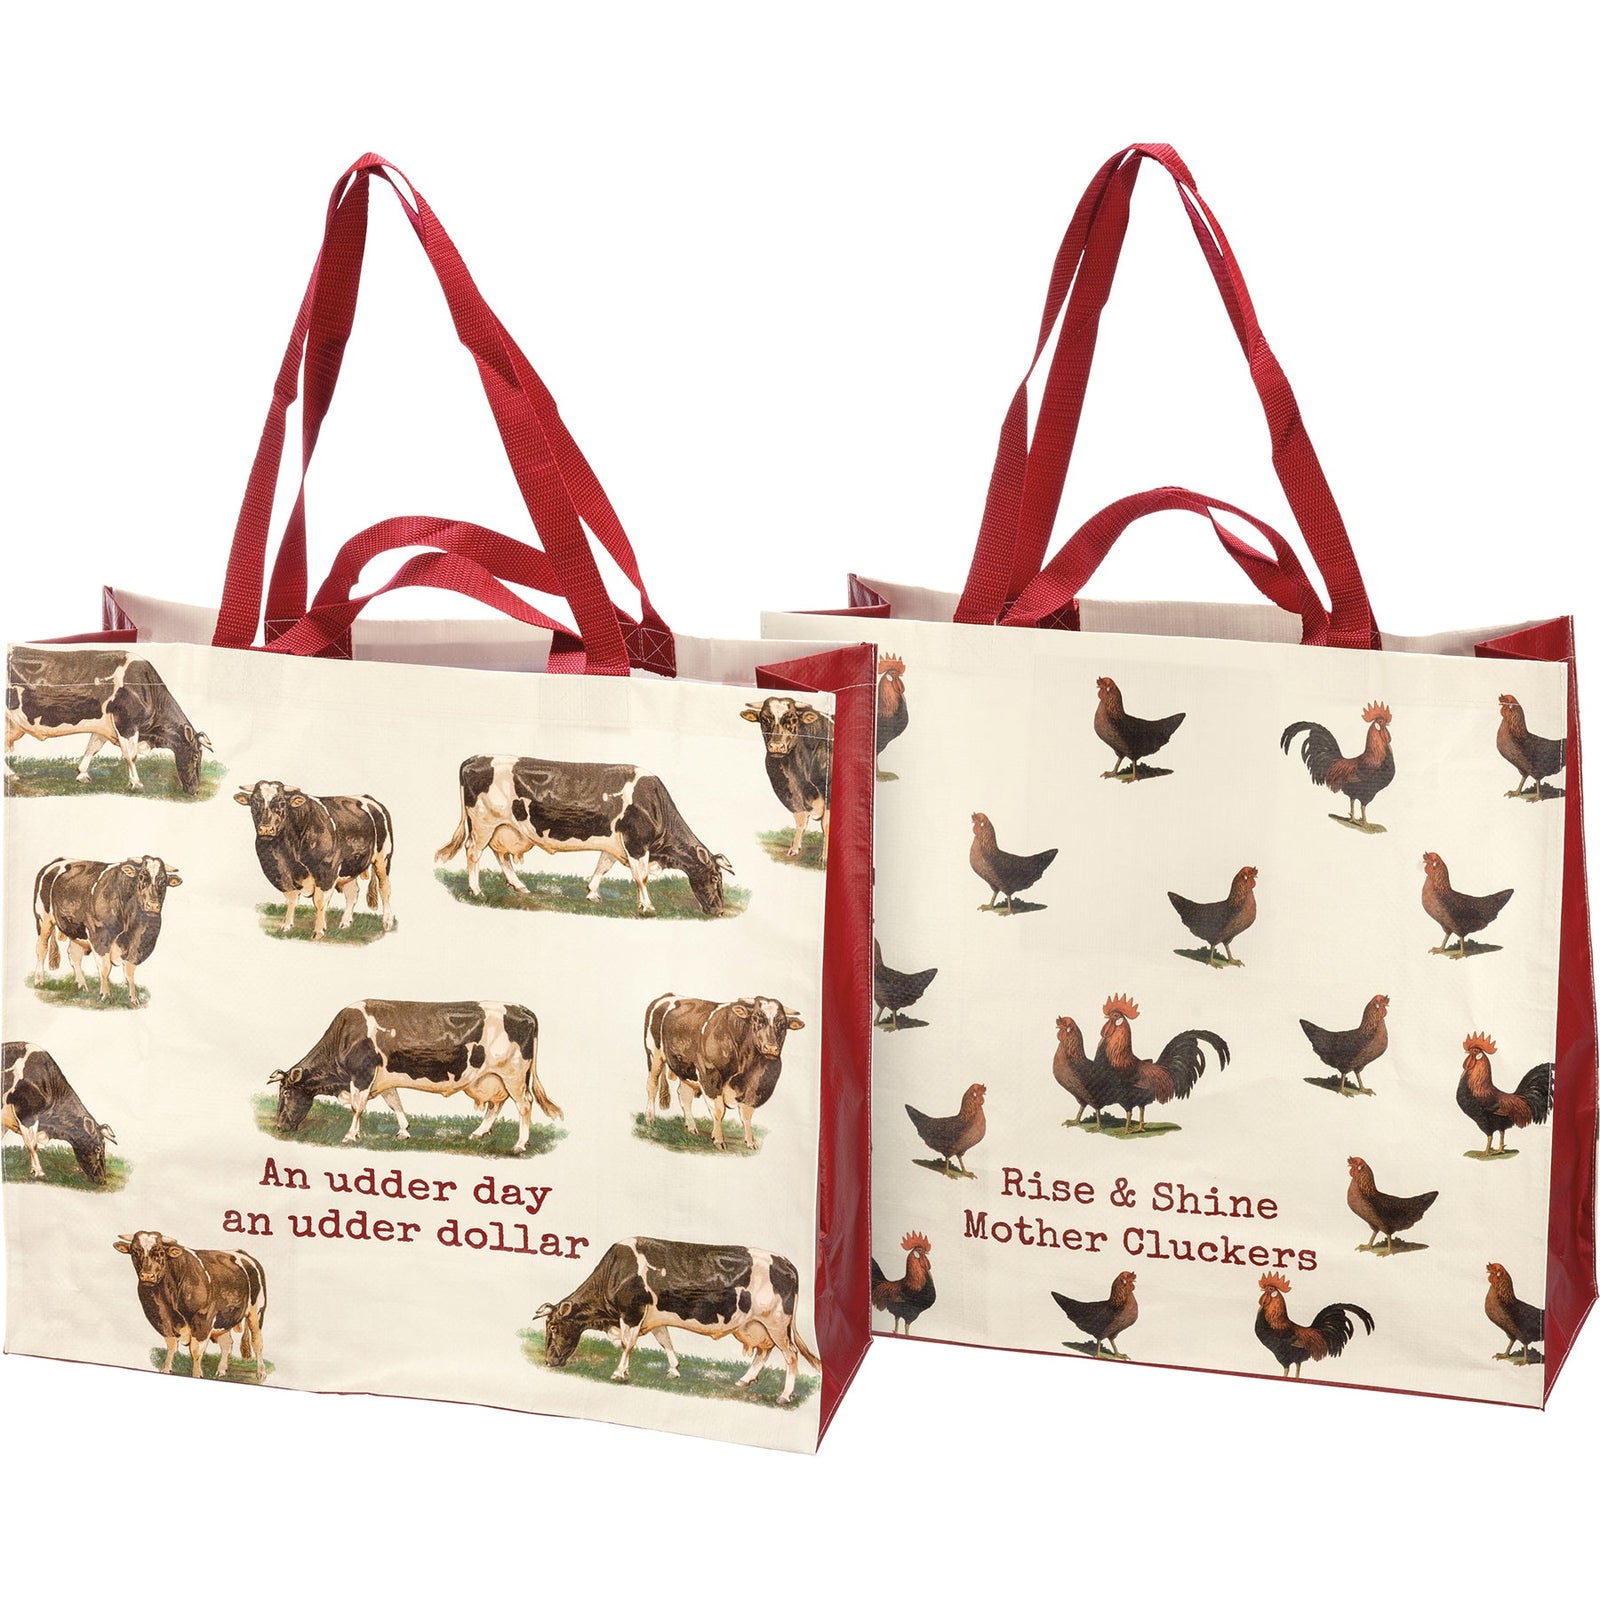 Rise & Shine Mother Cluckers Double-Sided Shopping Tote Bag